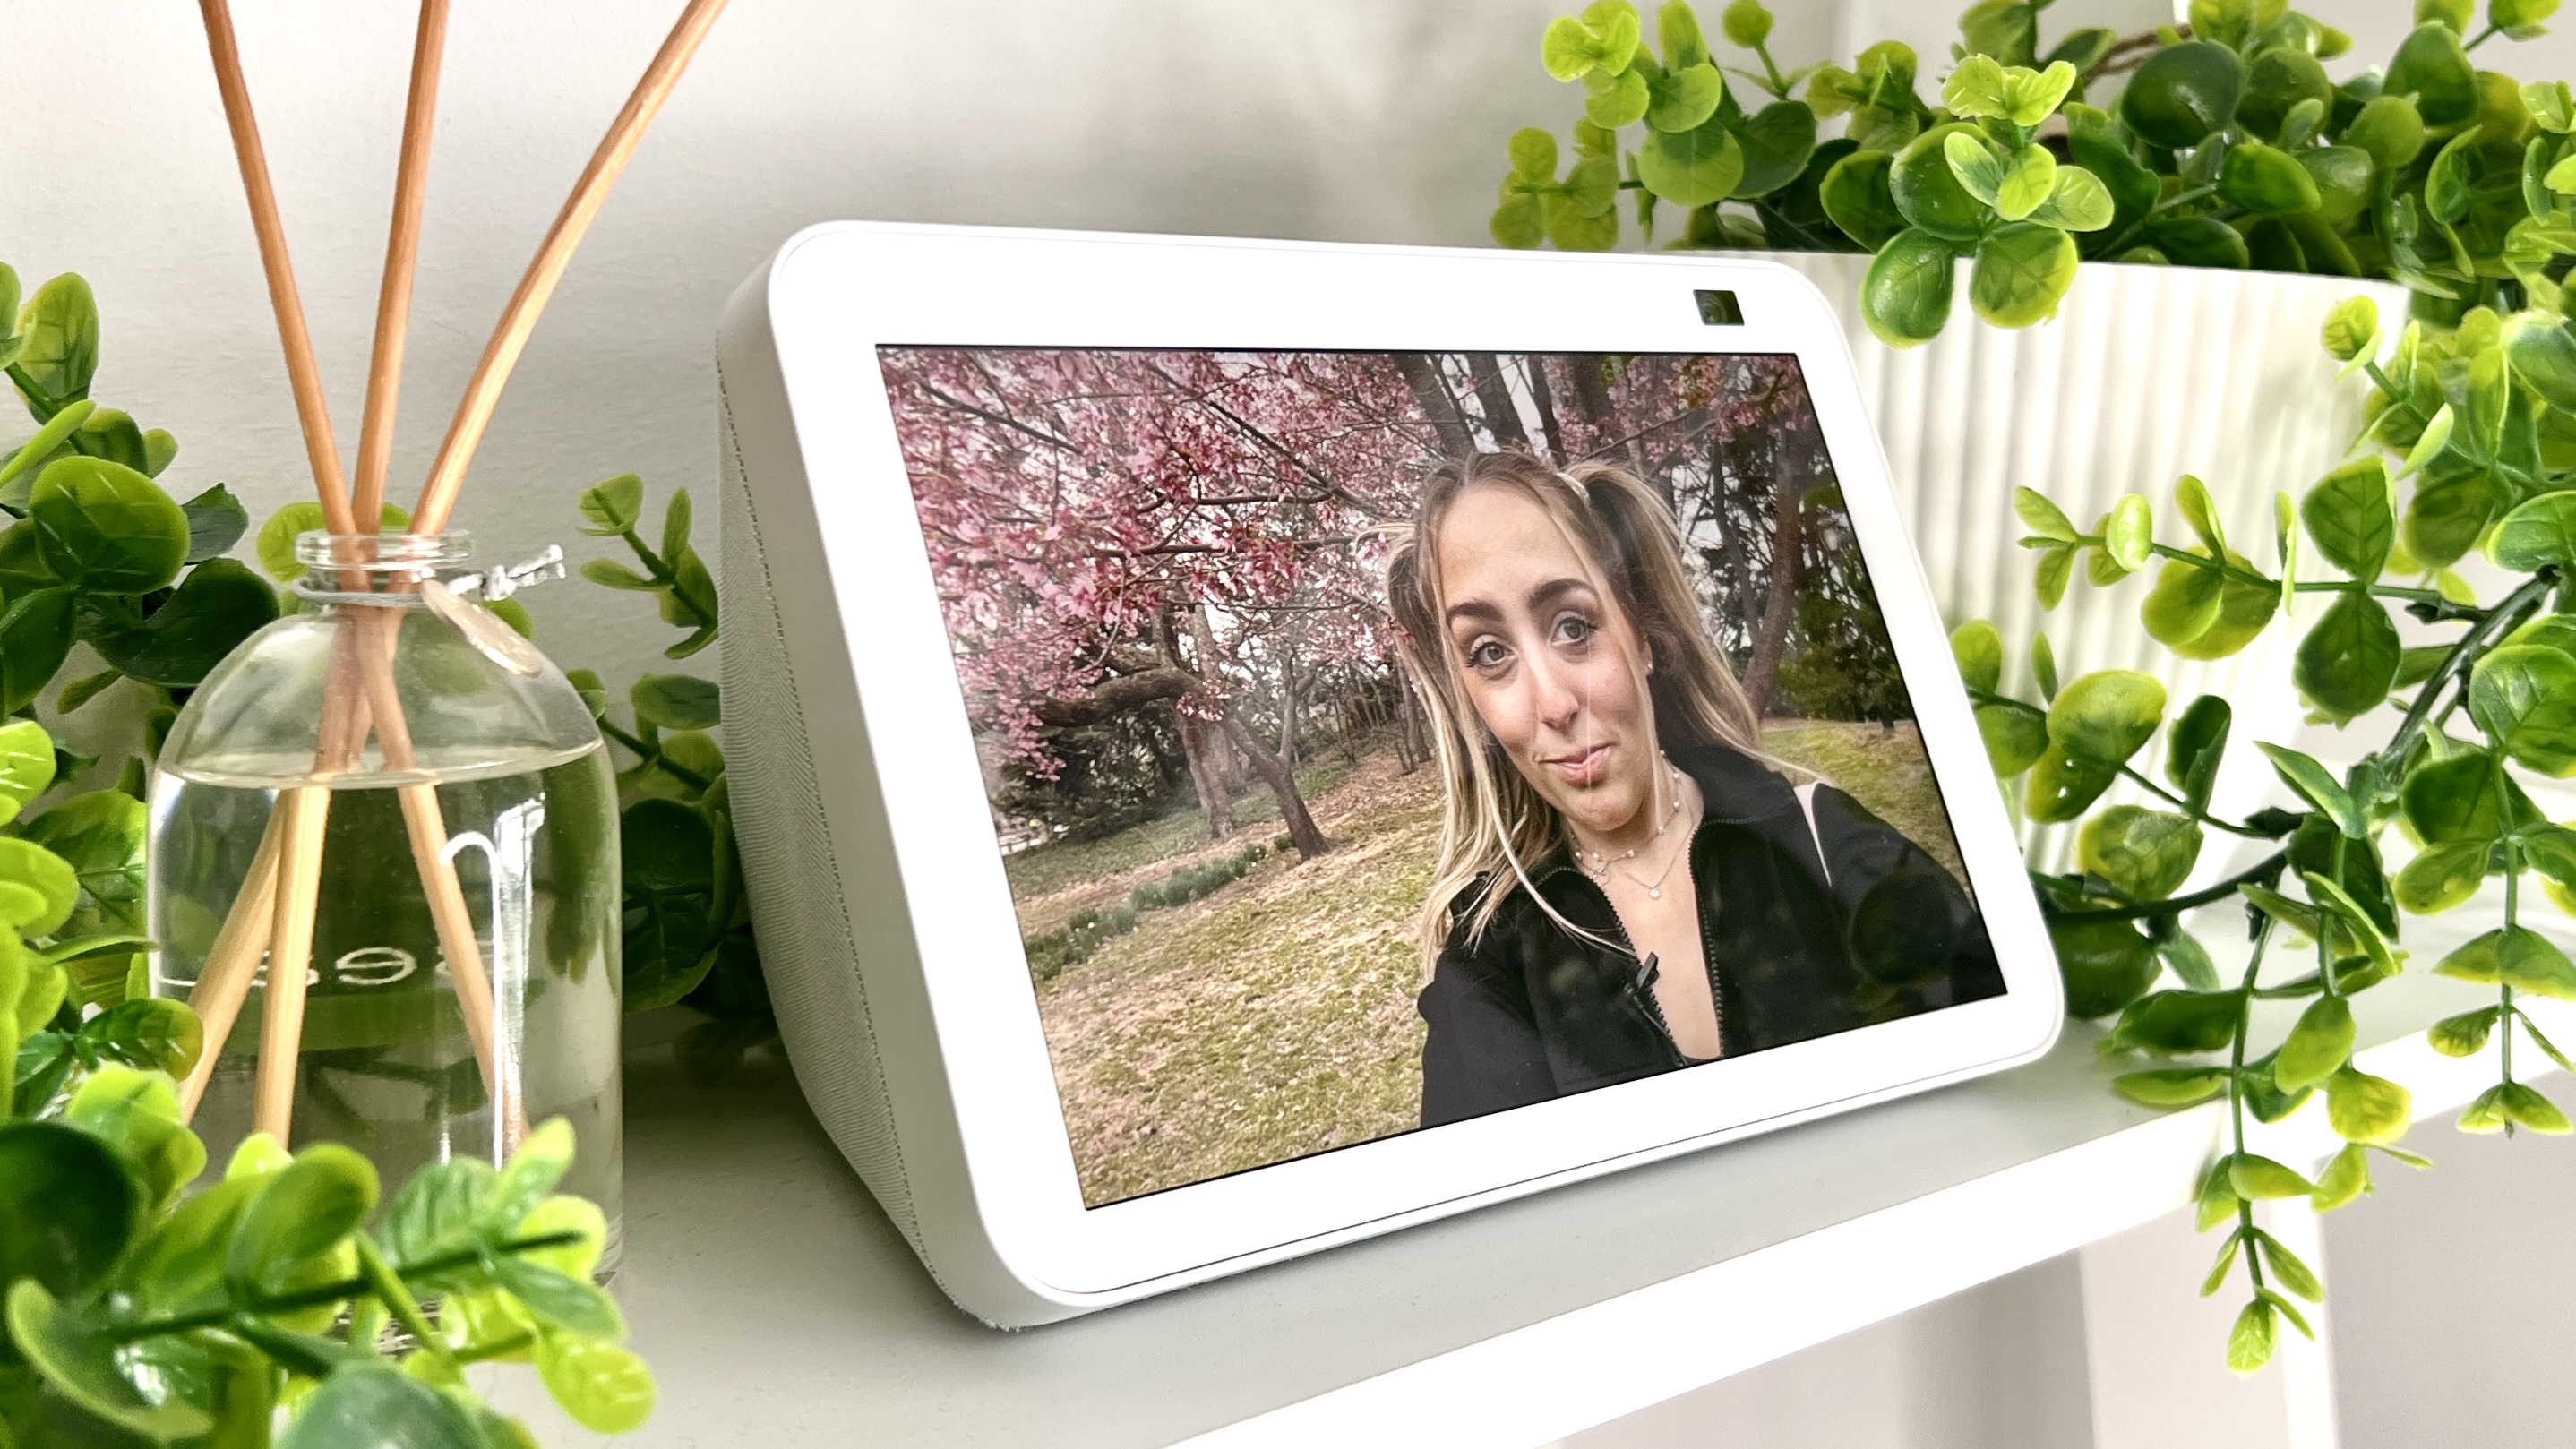 How to turn an Echo Show into a digital photo frame